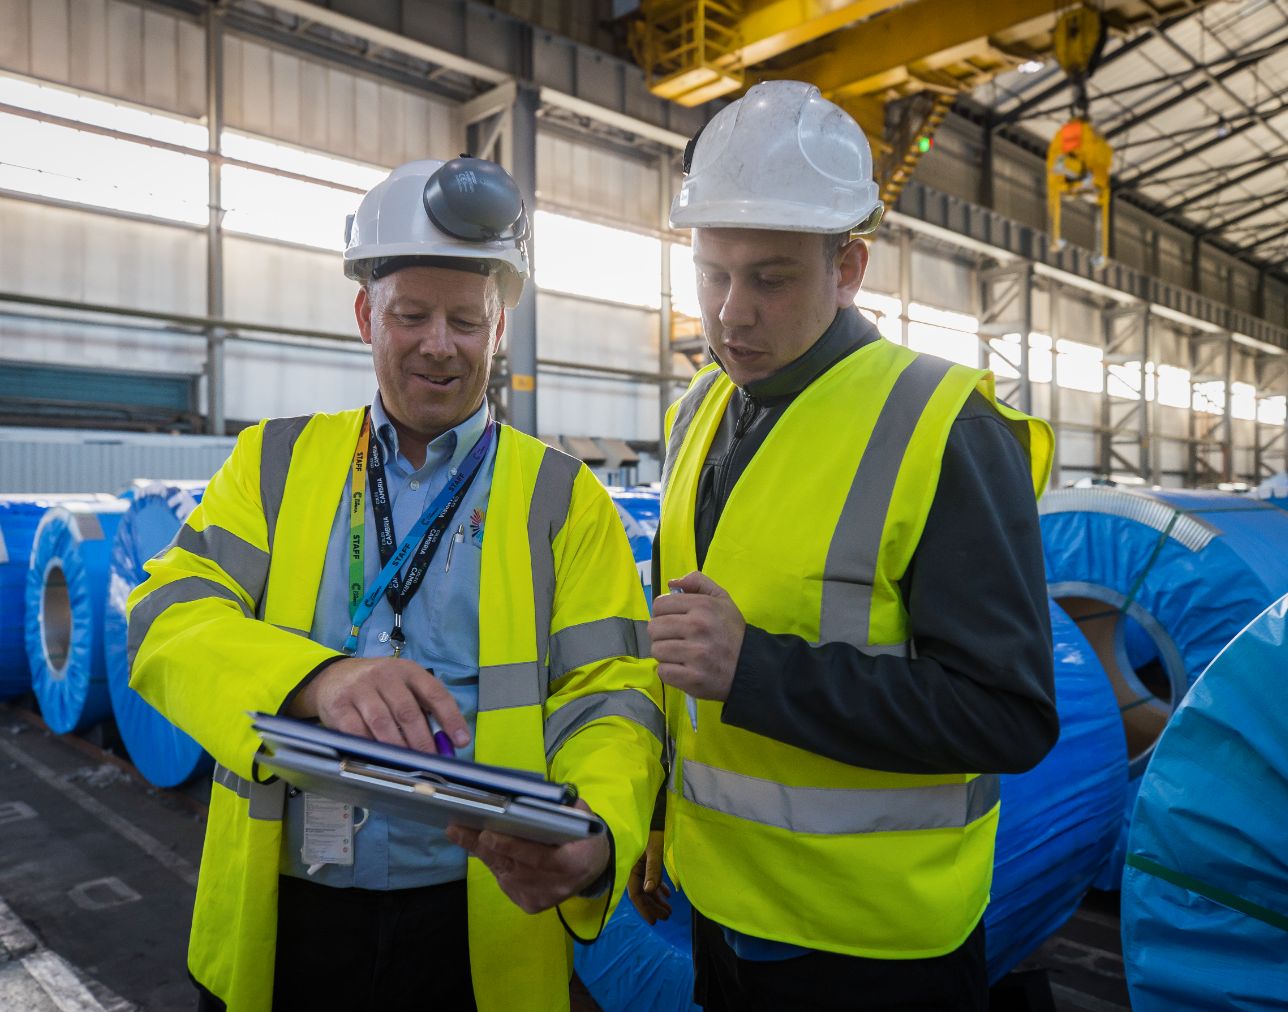 A warehousing apprentice looking at a notebook held by their assessor